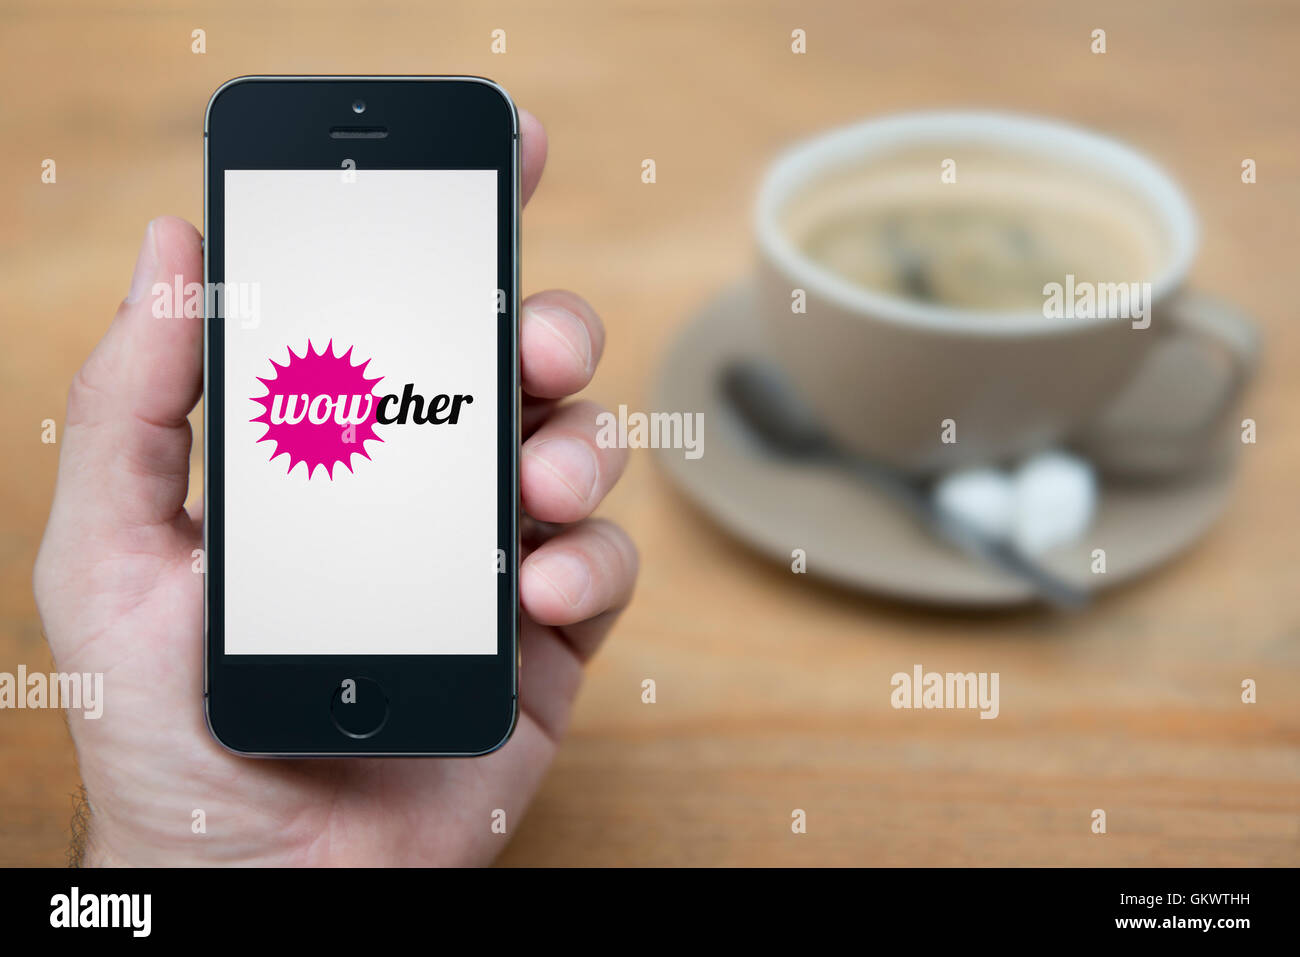 A man looks at his iPhone which displays the Wowcher logo, while sat with a cup of coffee (Editorial use only). Stock Photo